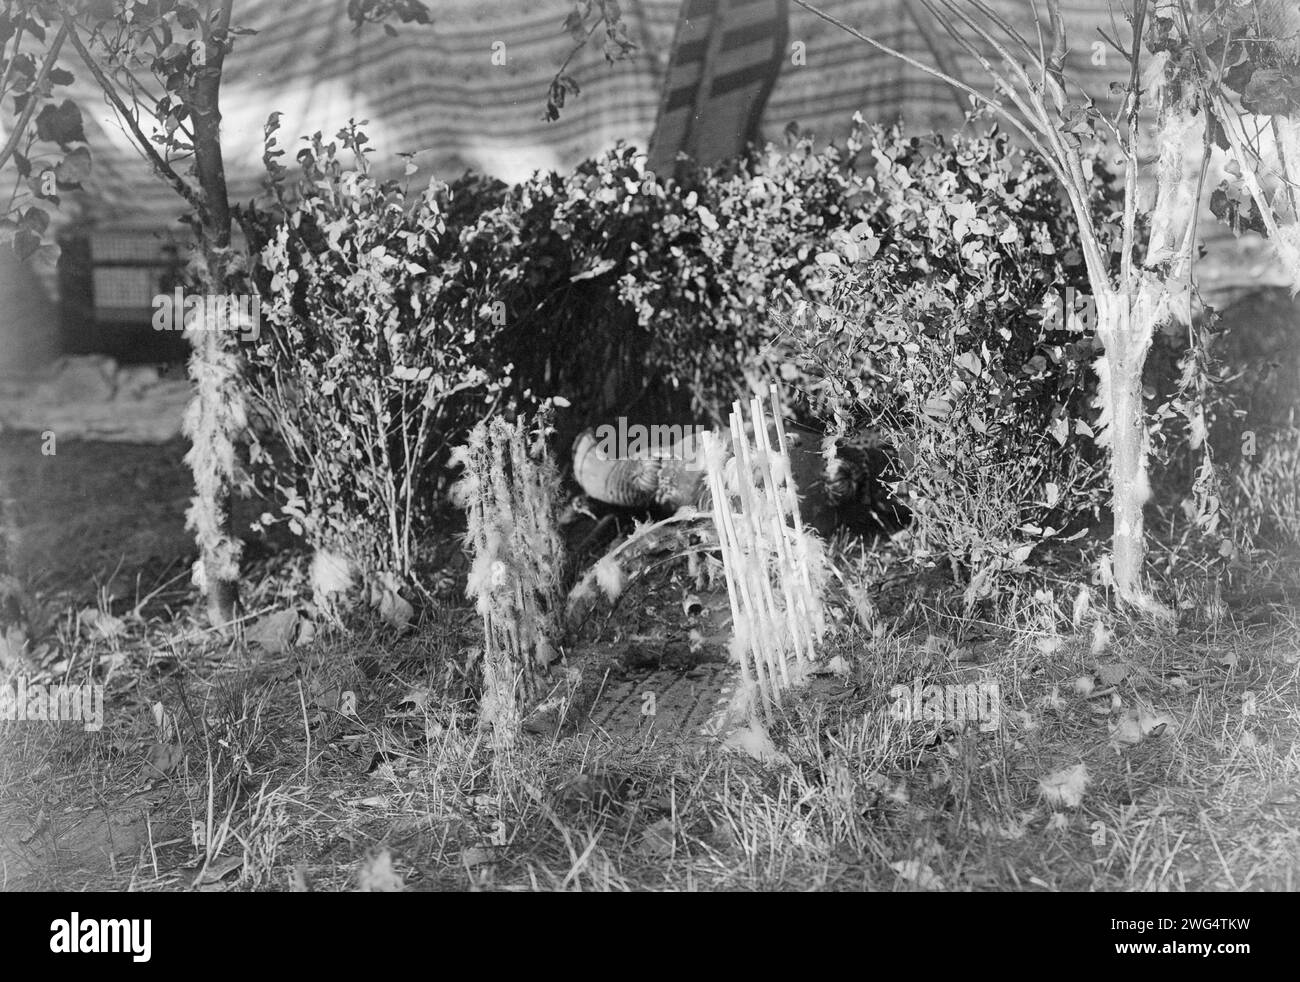 The altar, c1910. Cheyenne altar inside tent, with buffalo skull on ground surrounded by boughs and sticks with feathers; additional sticks and feathers are lined up on both sides of pattern drawn on ground. Stock Photo